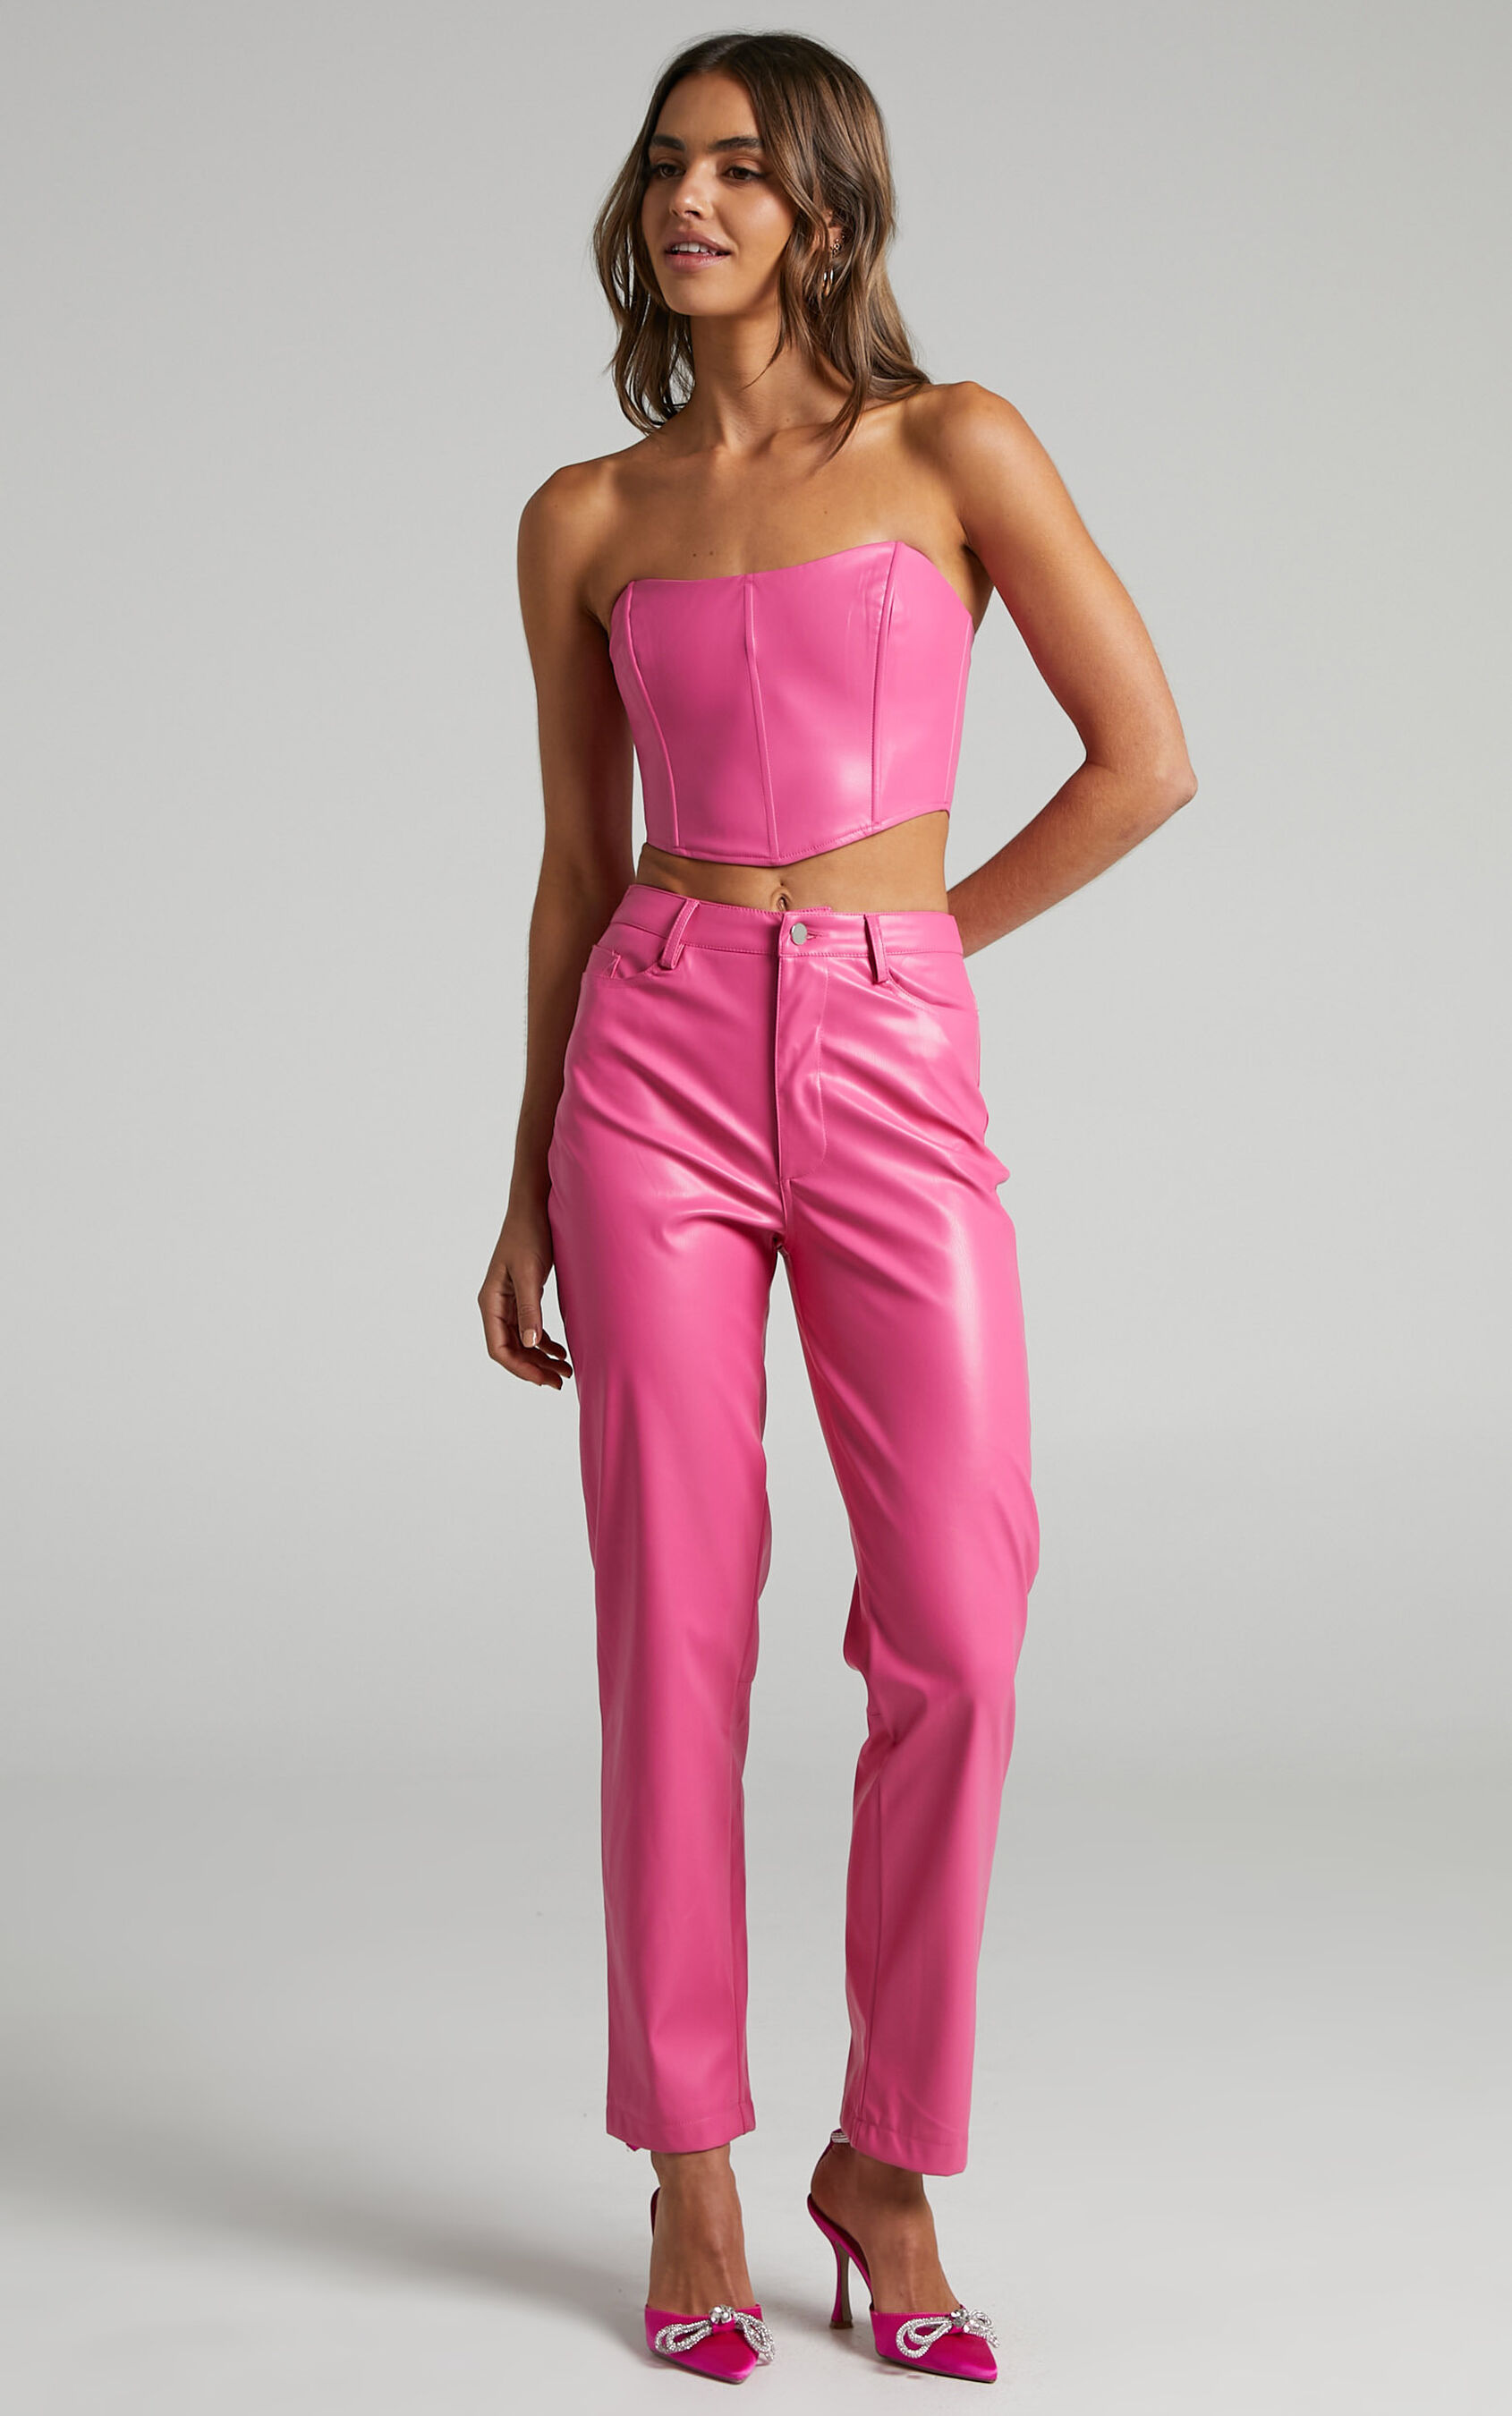 dilyenne-pants-in-hot-pink